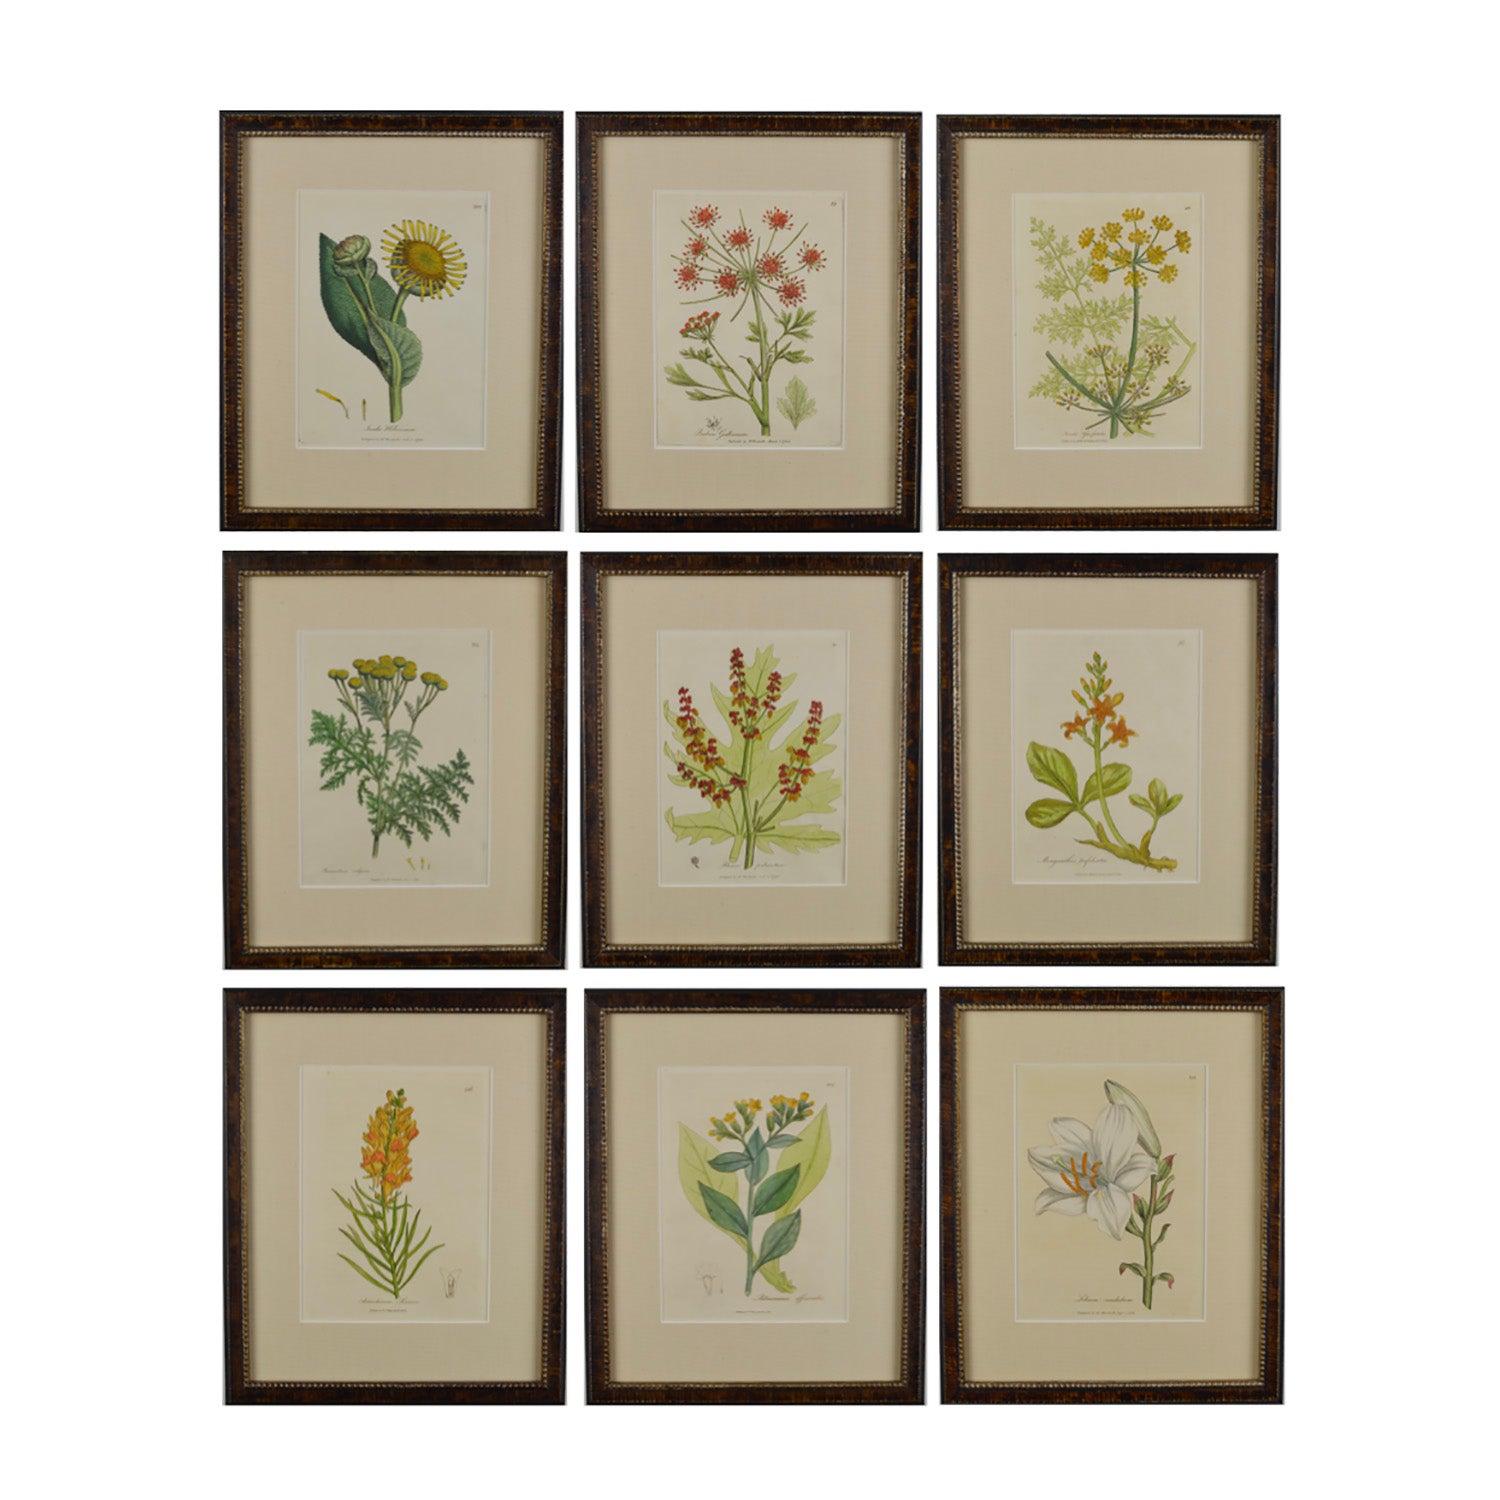 Set of Nine 18th Century Hand Colored Botanical Engravings by Woodville